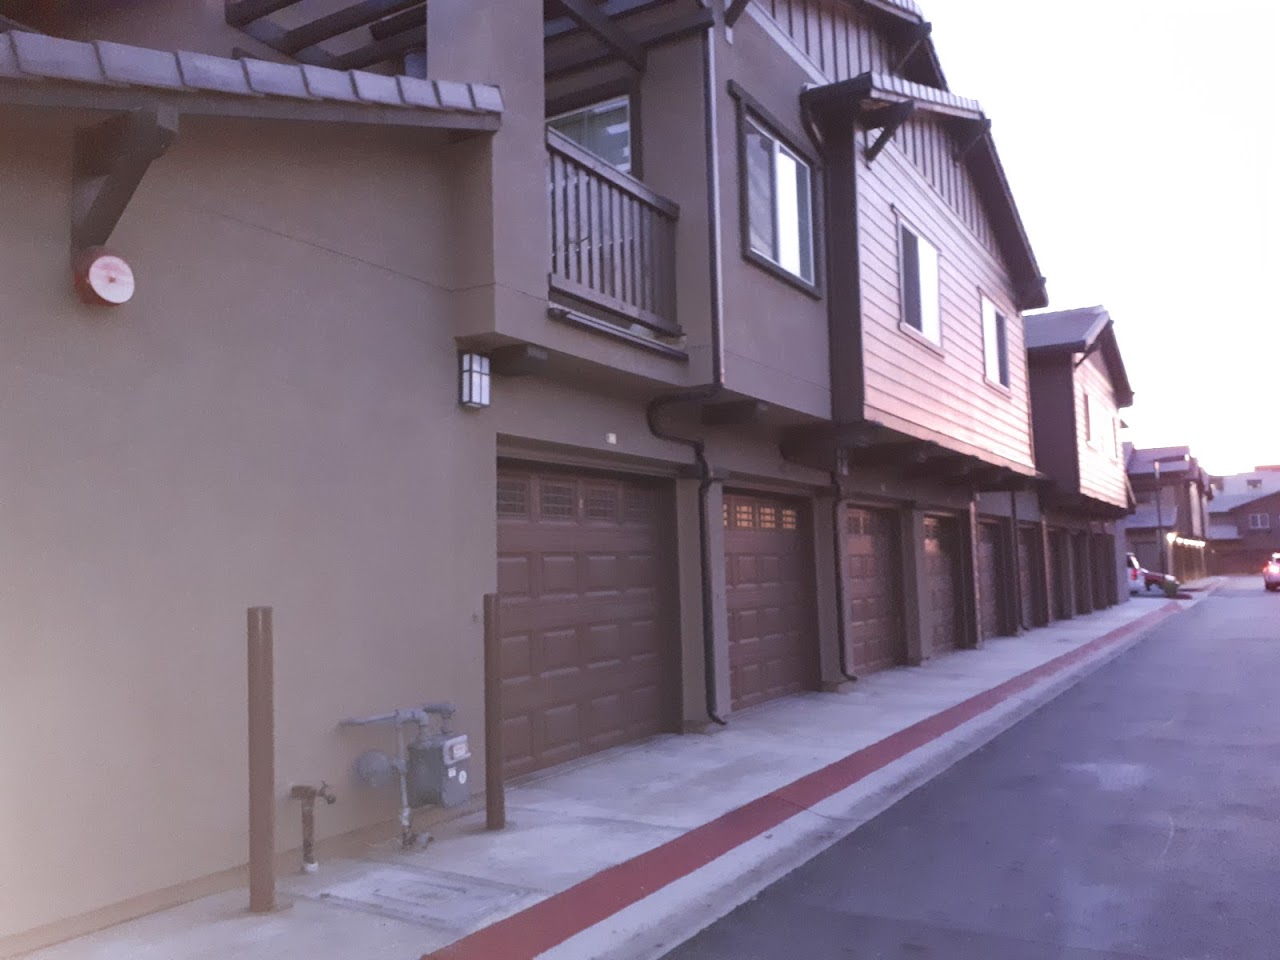 Photo of SUMMERHOUSE APARTMENTS. Affordable housing located at 44155 MARGARITA ROAD TEMECULA, CA 92592